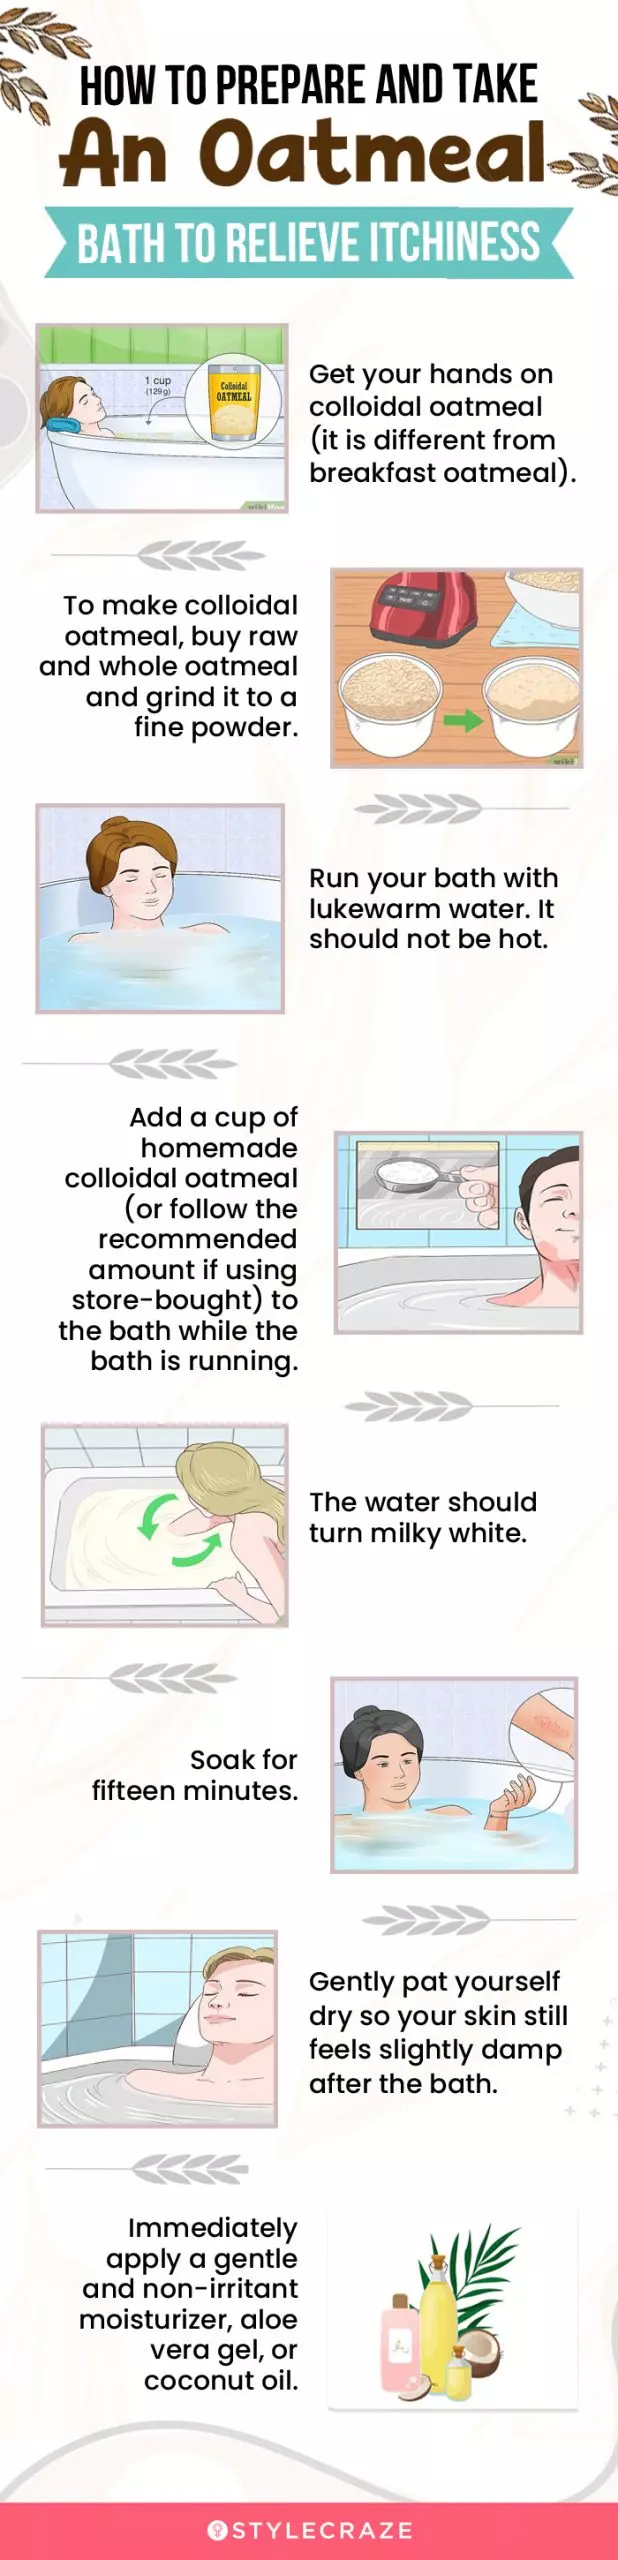 how to prepare and take an oatmeal bath to relieve itchiness (infographic)